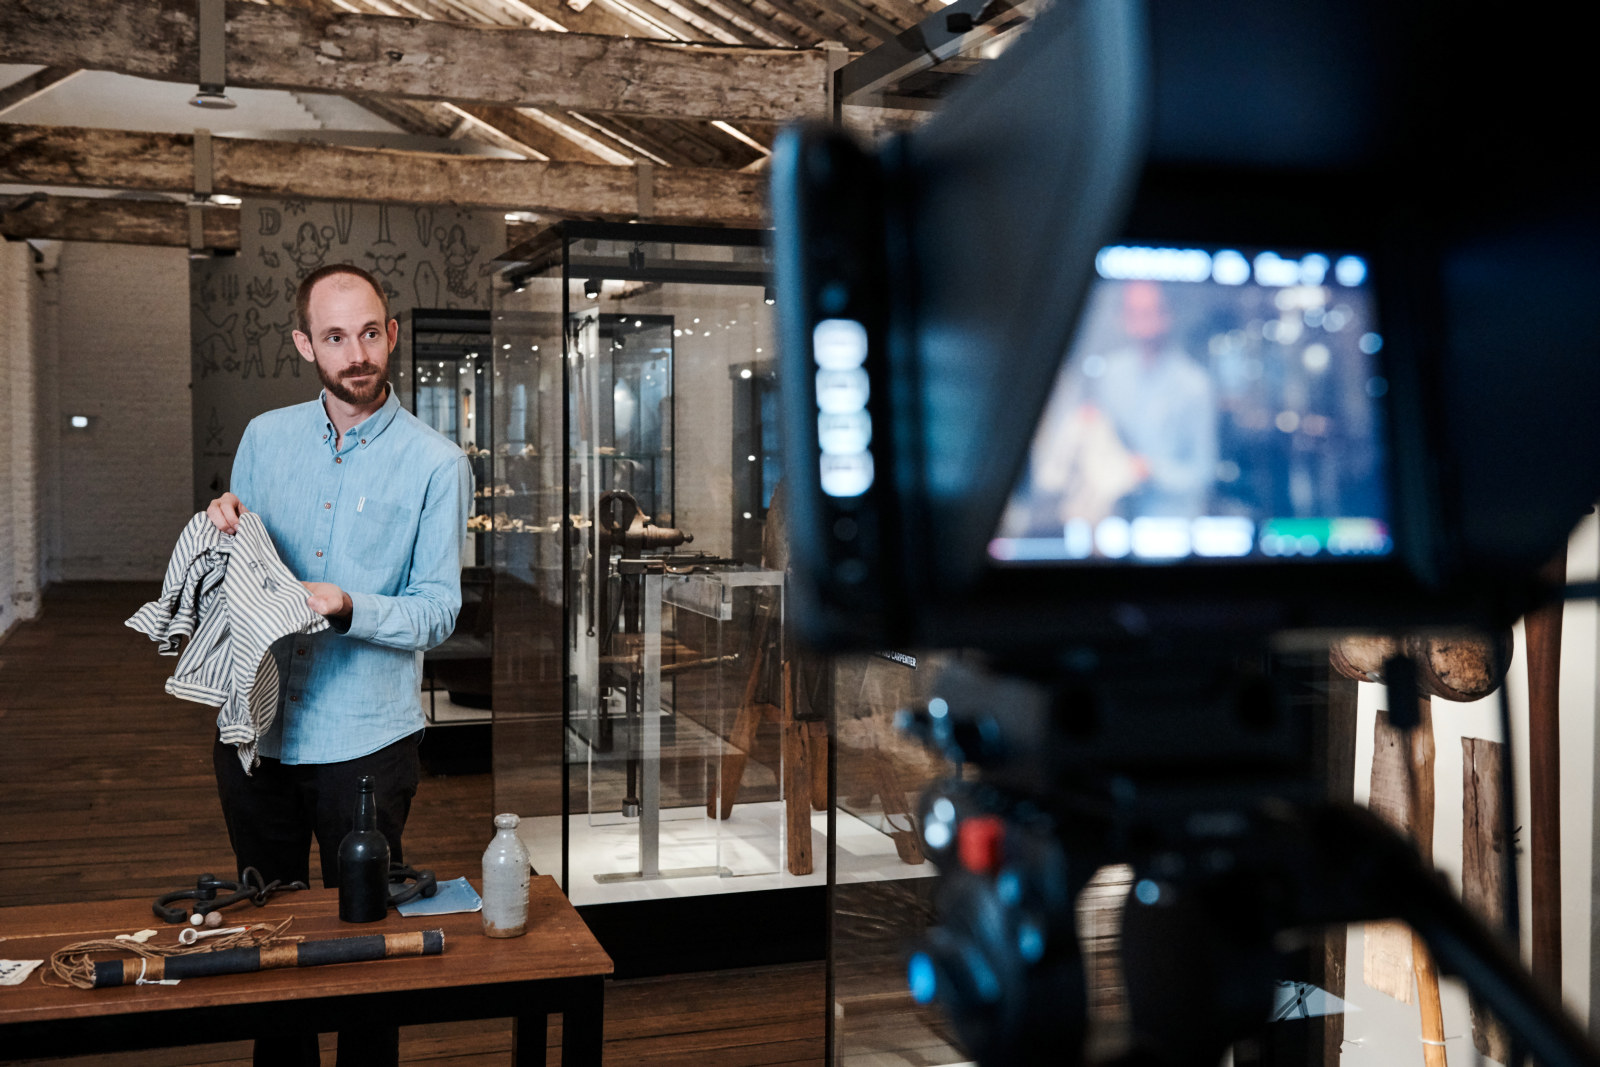 Carlin de Montfort, curator, holds up a convict shirt to the camera during a virtual excursion. He is standing behind a table of historical objects in the Meet the Convicts room on the top floor of the Hyde Park Barracks.